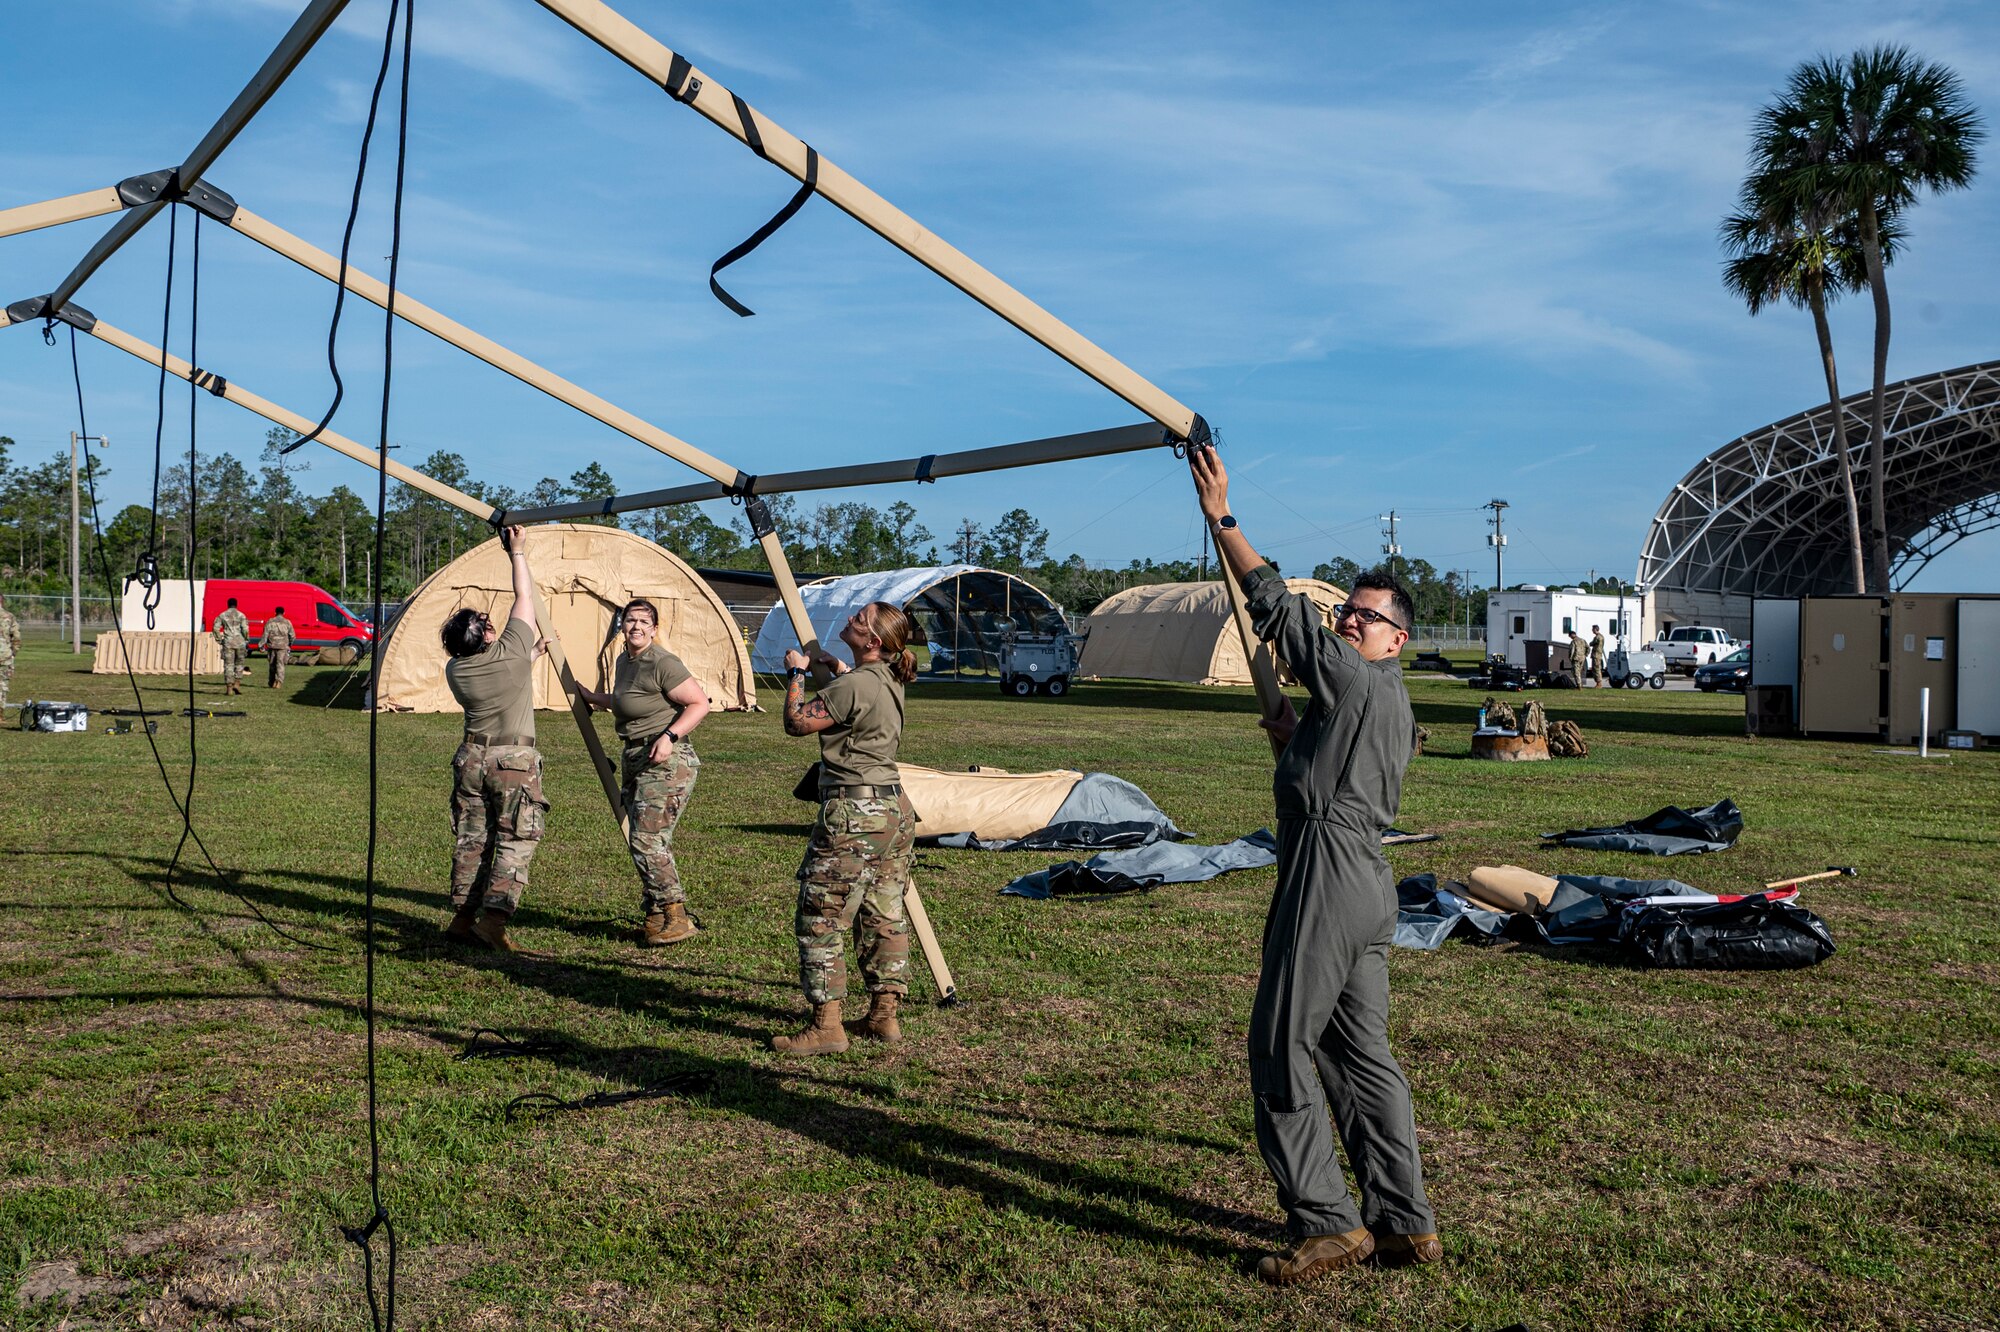 U.S. Air Force Airmen assigned to the 23rd Medical Group build a tent at Avon Park Air Force Range, Florida, April 9, 2024. Access to medical care in an austere environment is crucial to ensure the health and safety of Airmen. (U.S. Air Force photo by Airman 1st Class Leonid Soubbotine)